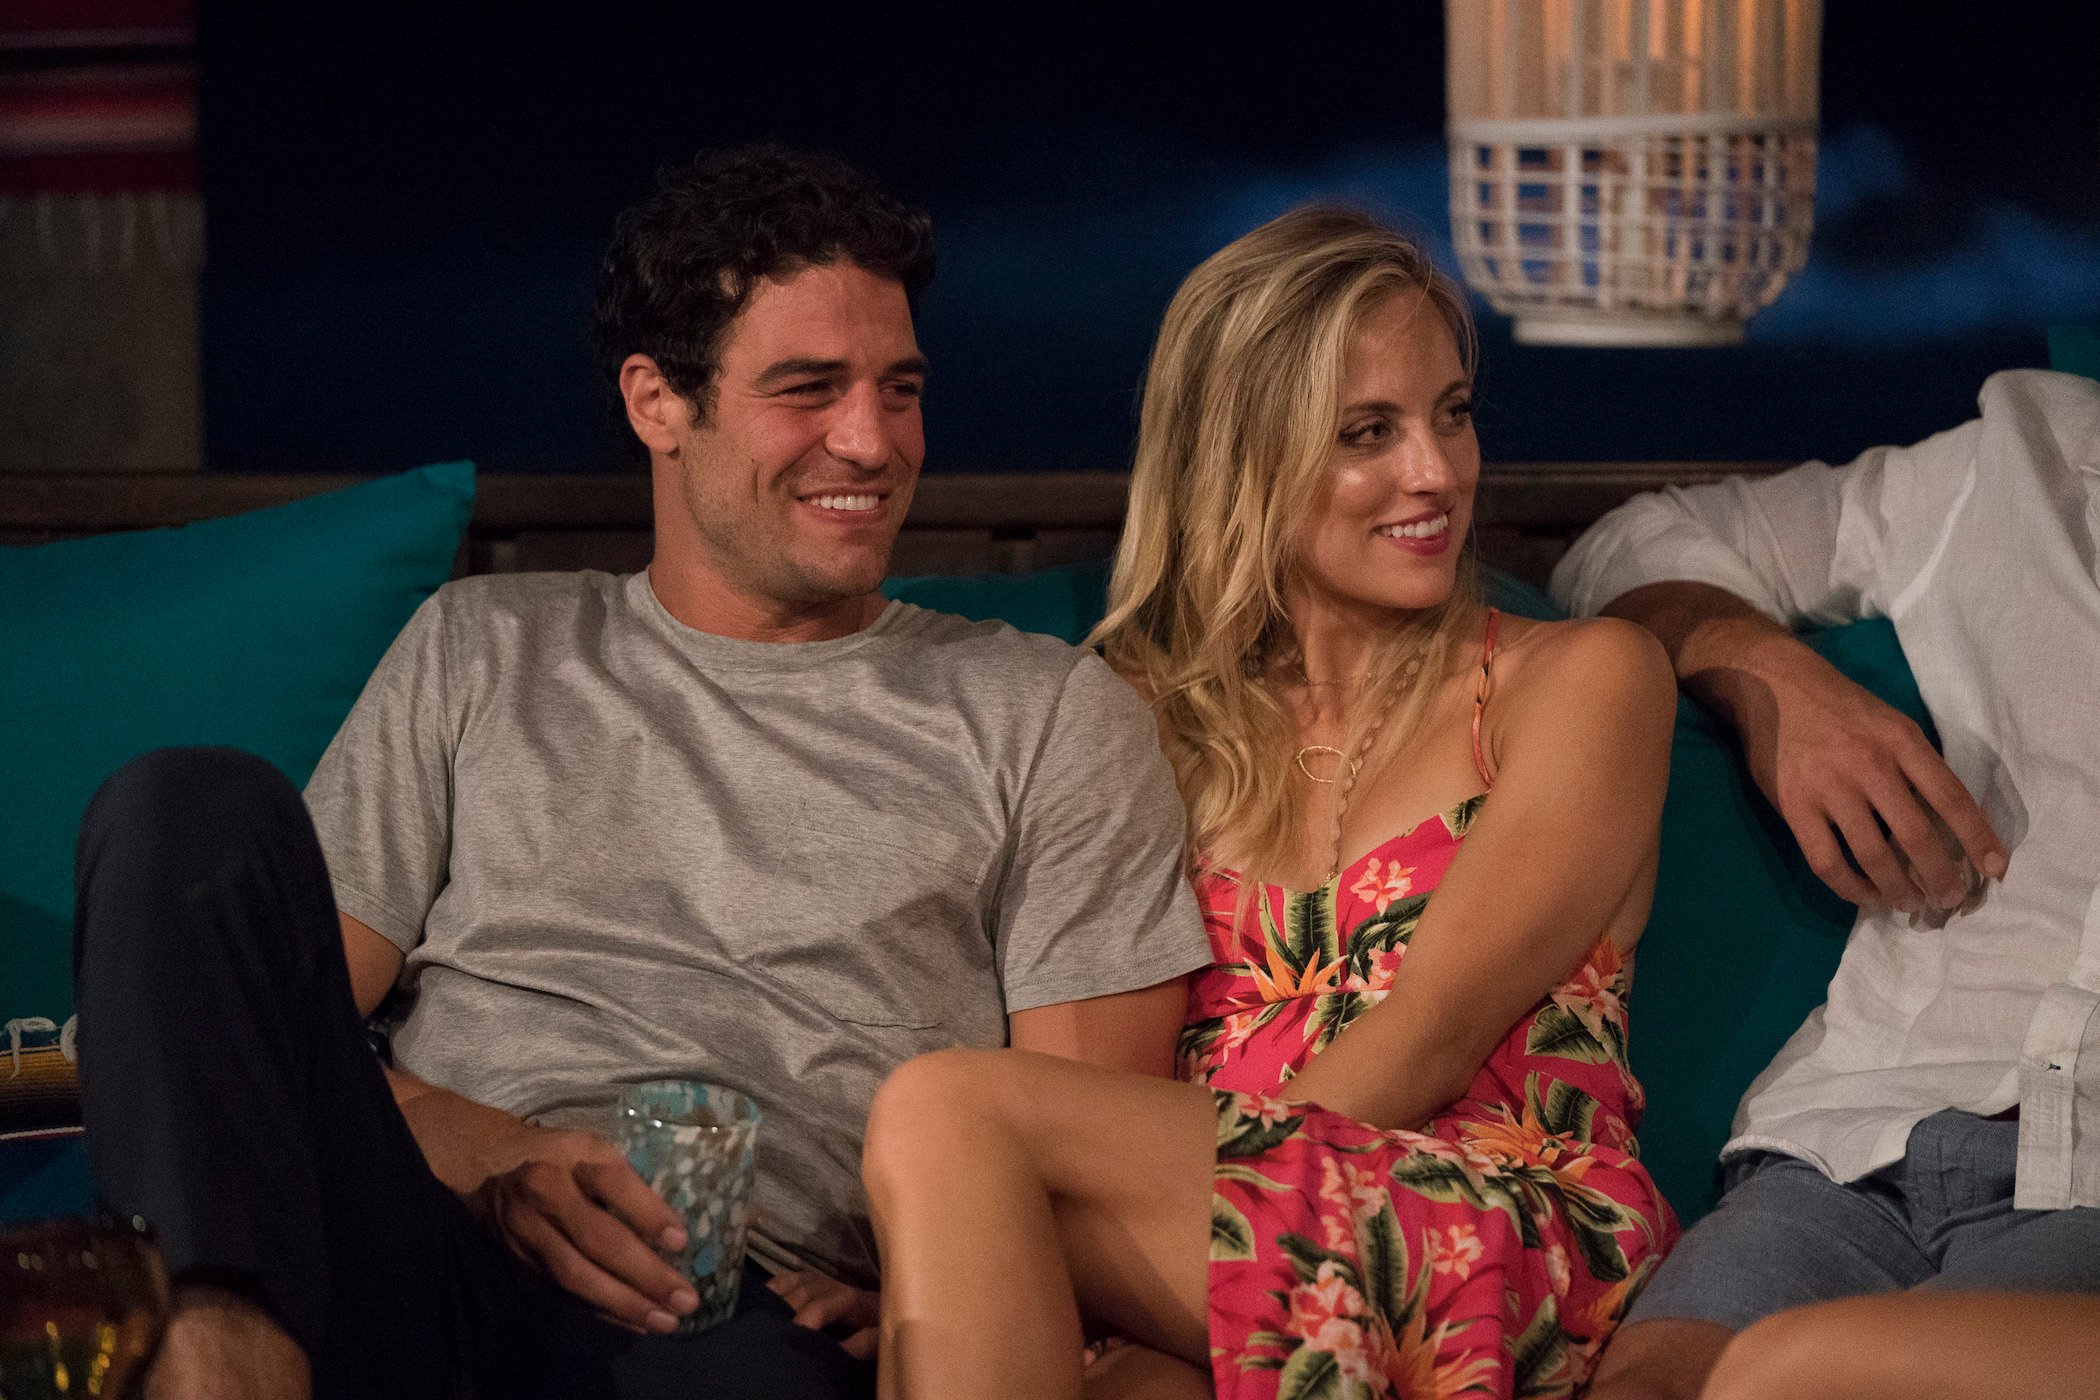 'Bachelor in Paradise' stars Joe Amabile and Kendall Long sitting next to each other and smiling